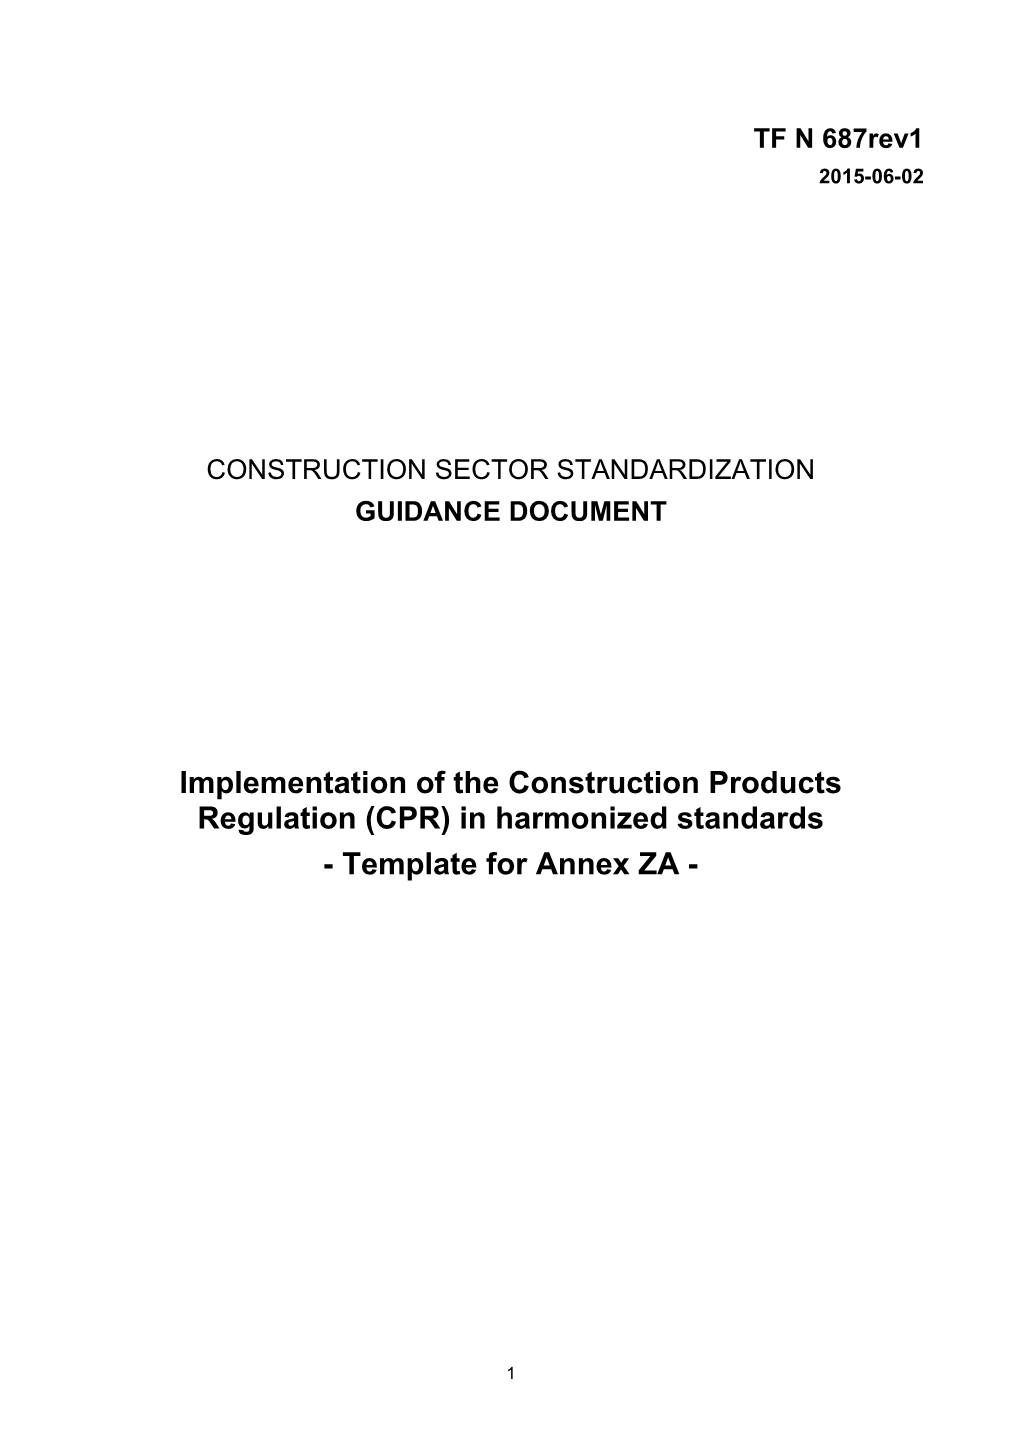 Implementation of the Construction Products Regulation (CPR) in Harmonized Standards